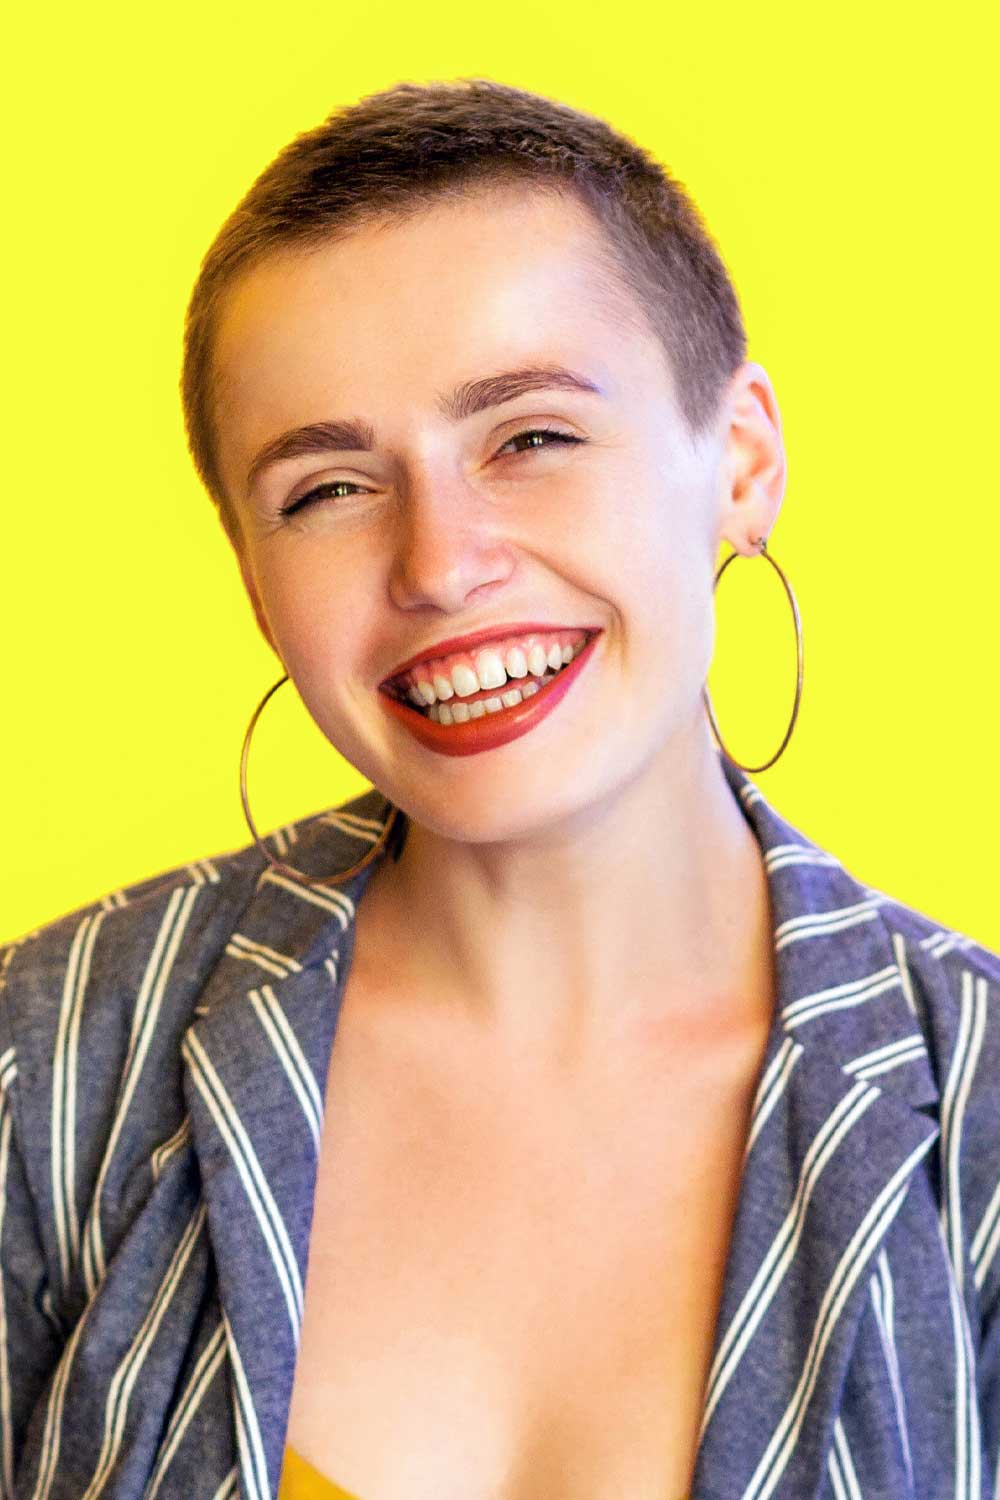 Who is suited to a women's buzz cut?